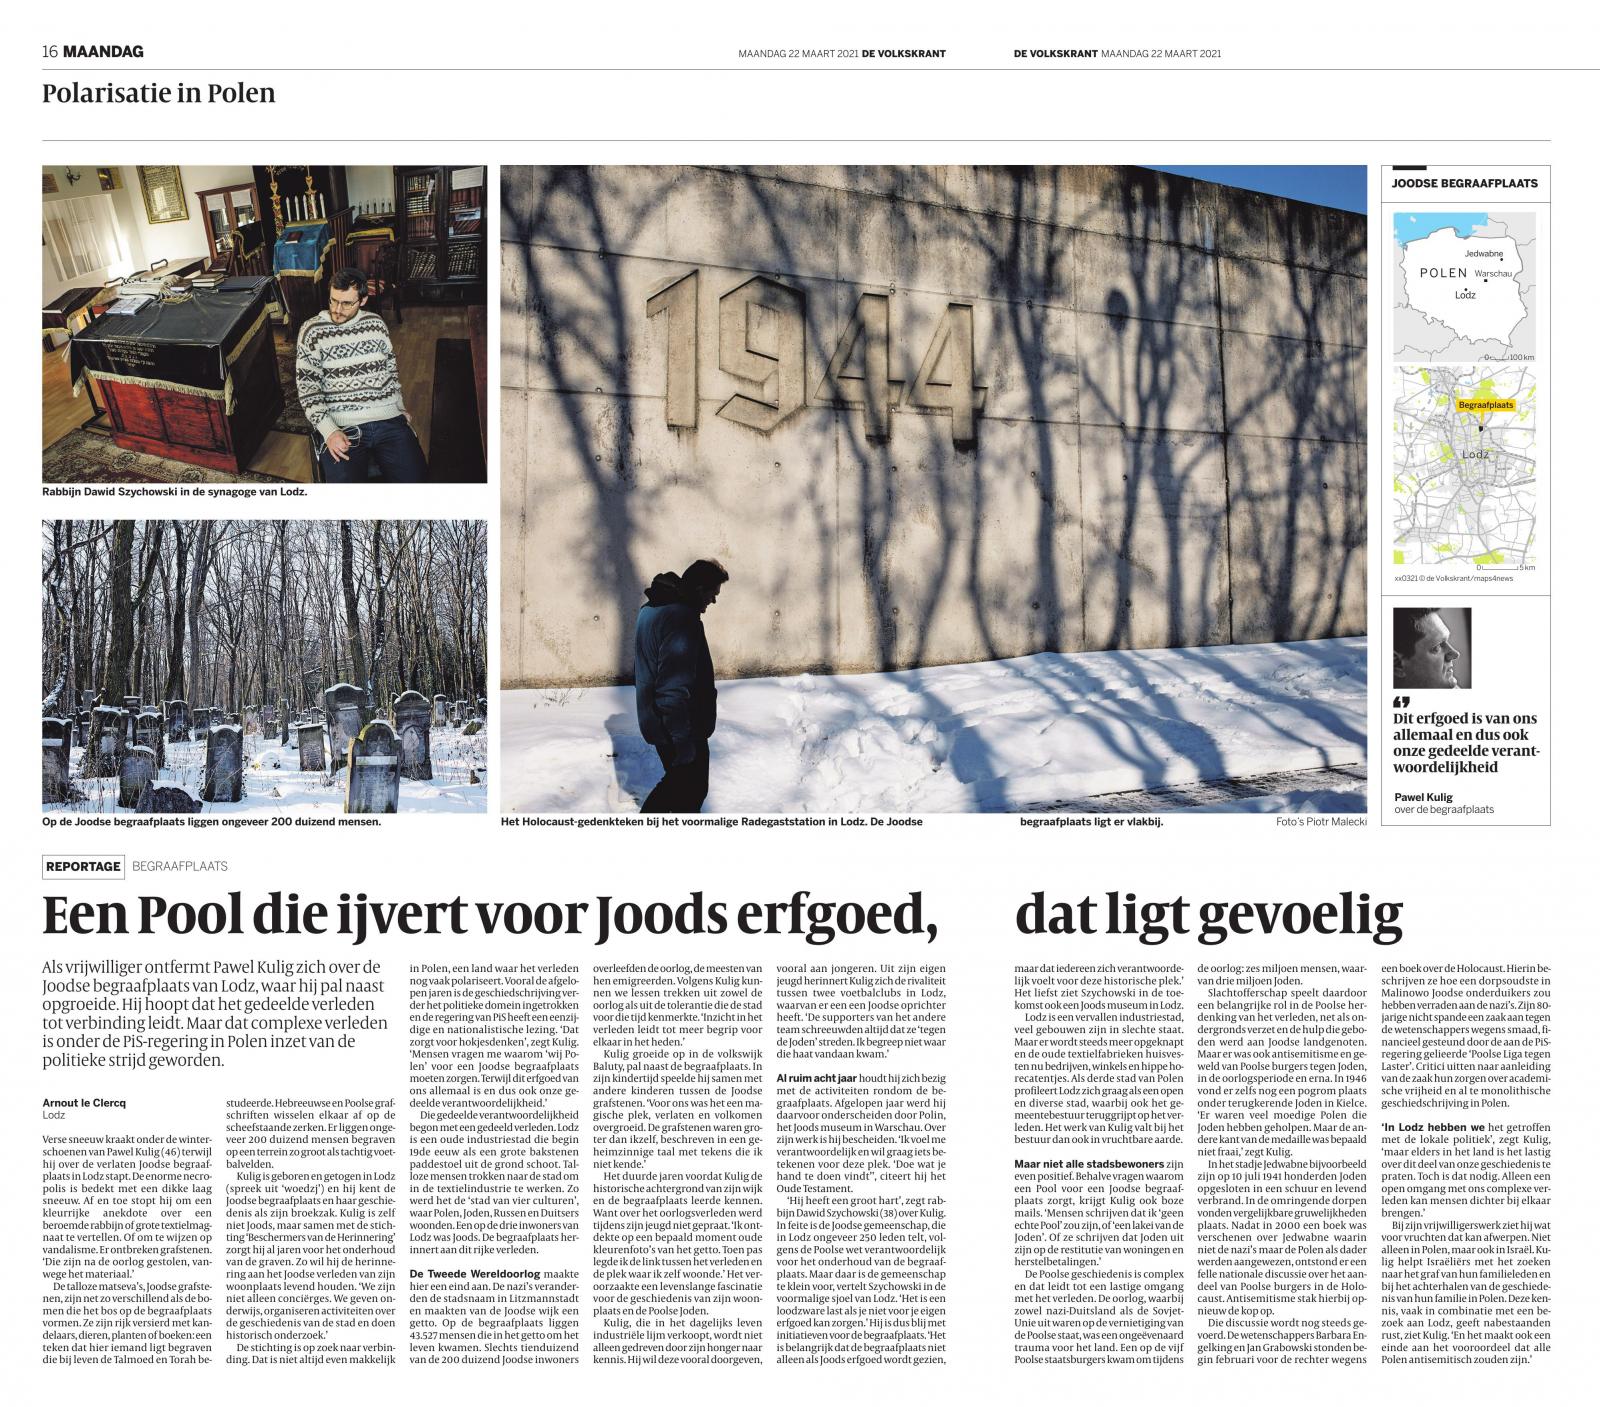 Thumbnail of Short reportage about Jewish cemetery in Lodz published by De Volkskrant, The Netherlands